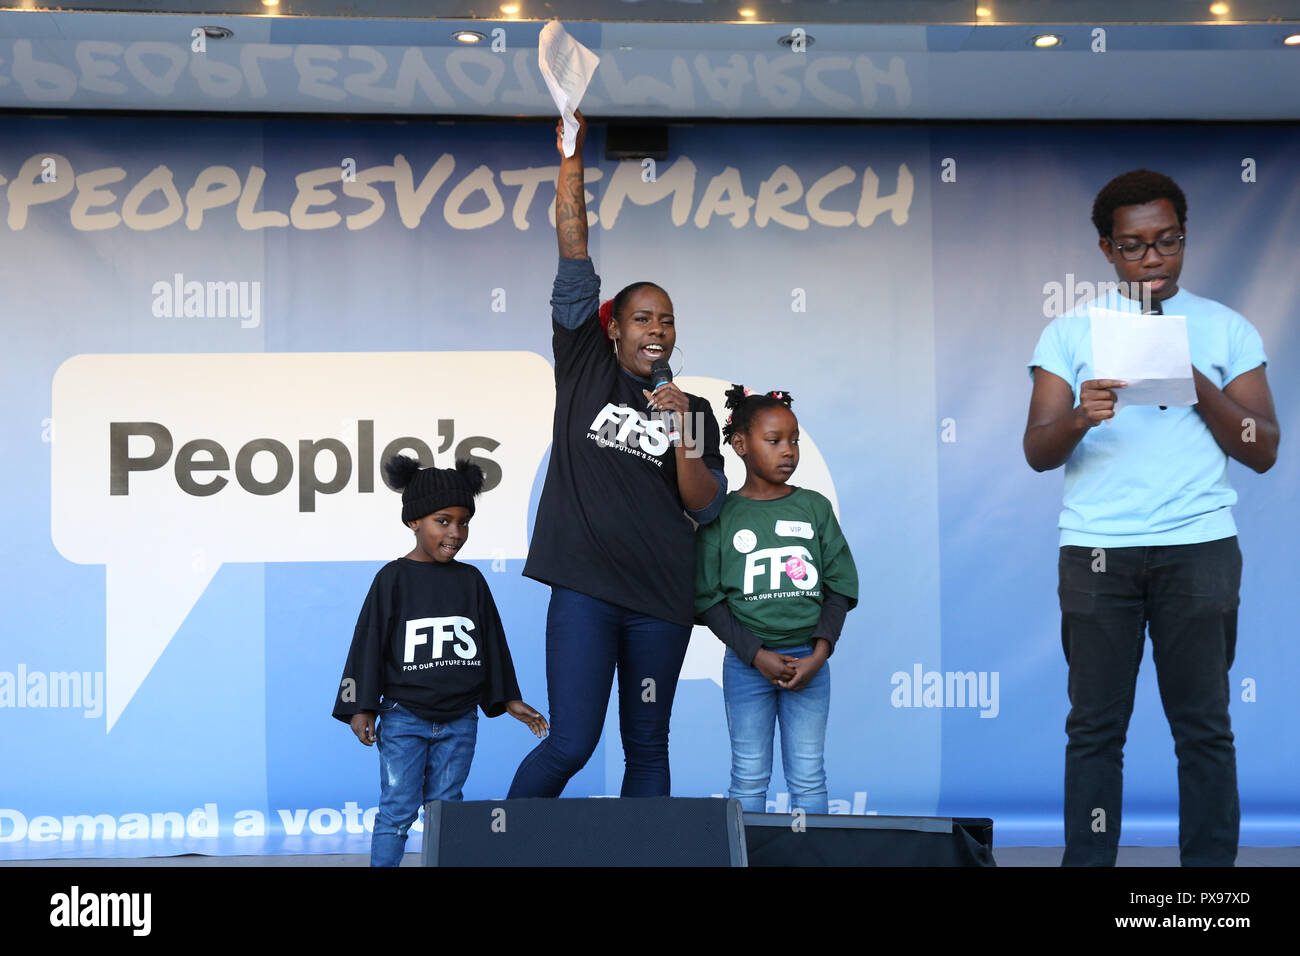 Parliament Square, London, UK, 20th Oct 2018. Shakira Martin, president of the NUS, has brought her two young daughters on stage.   The People’s Vote March demands a final vote on the Brexit deal. It makes its way through Central London and ends with a rally and speeches in Parliament Square. The march is organised by the People’s Vote campaign and attended by many different groups and organisations. Credit: Imageplotter News and Sports/Alamy Live News Stock Photo